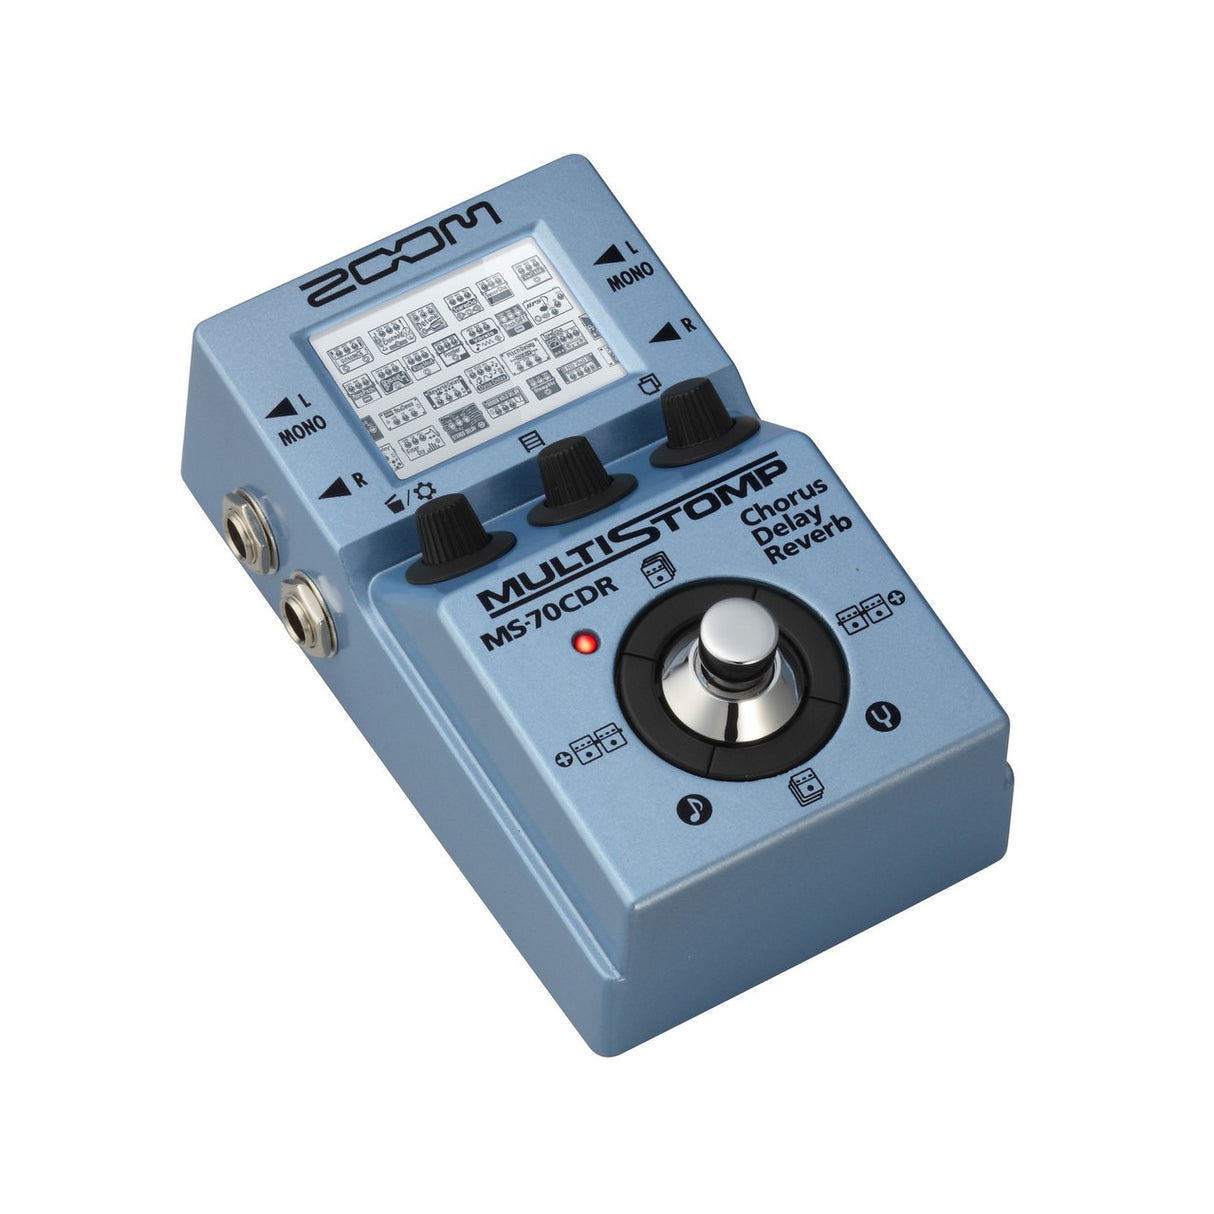 Zoom MS-70CDR | MultiStomp Chorus Delay Reverb Pedal with Chromatic Tuner Patch Cycling Battery Powered Dual 1/4 Inch Inputs Outputs